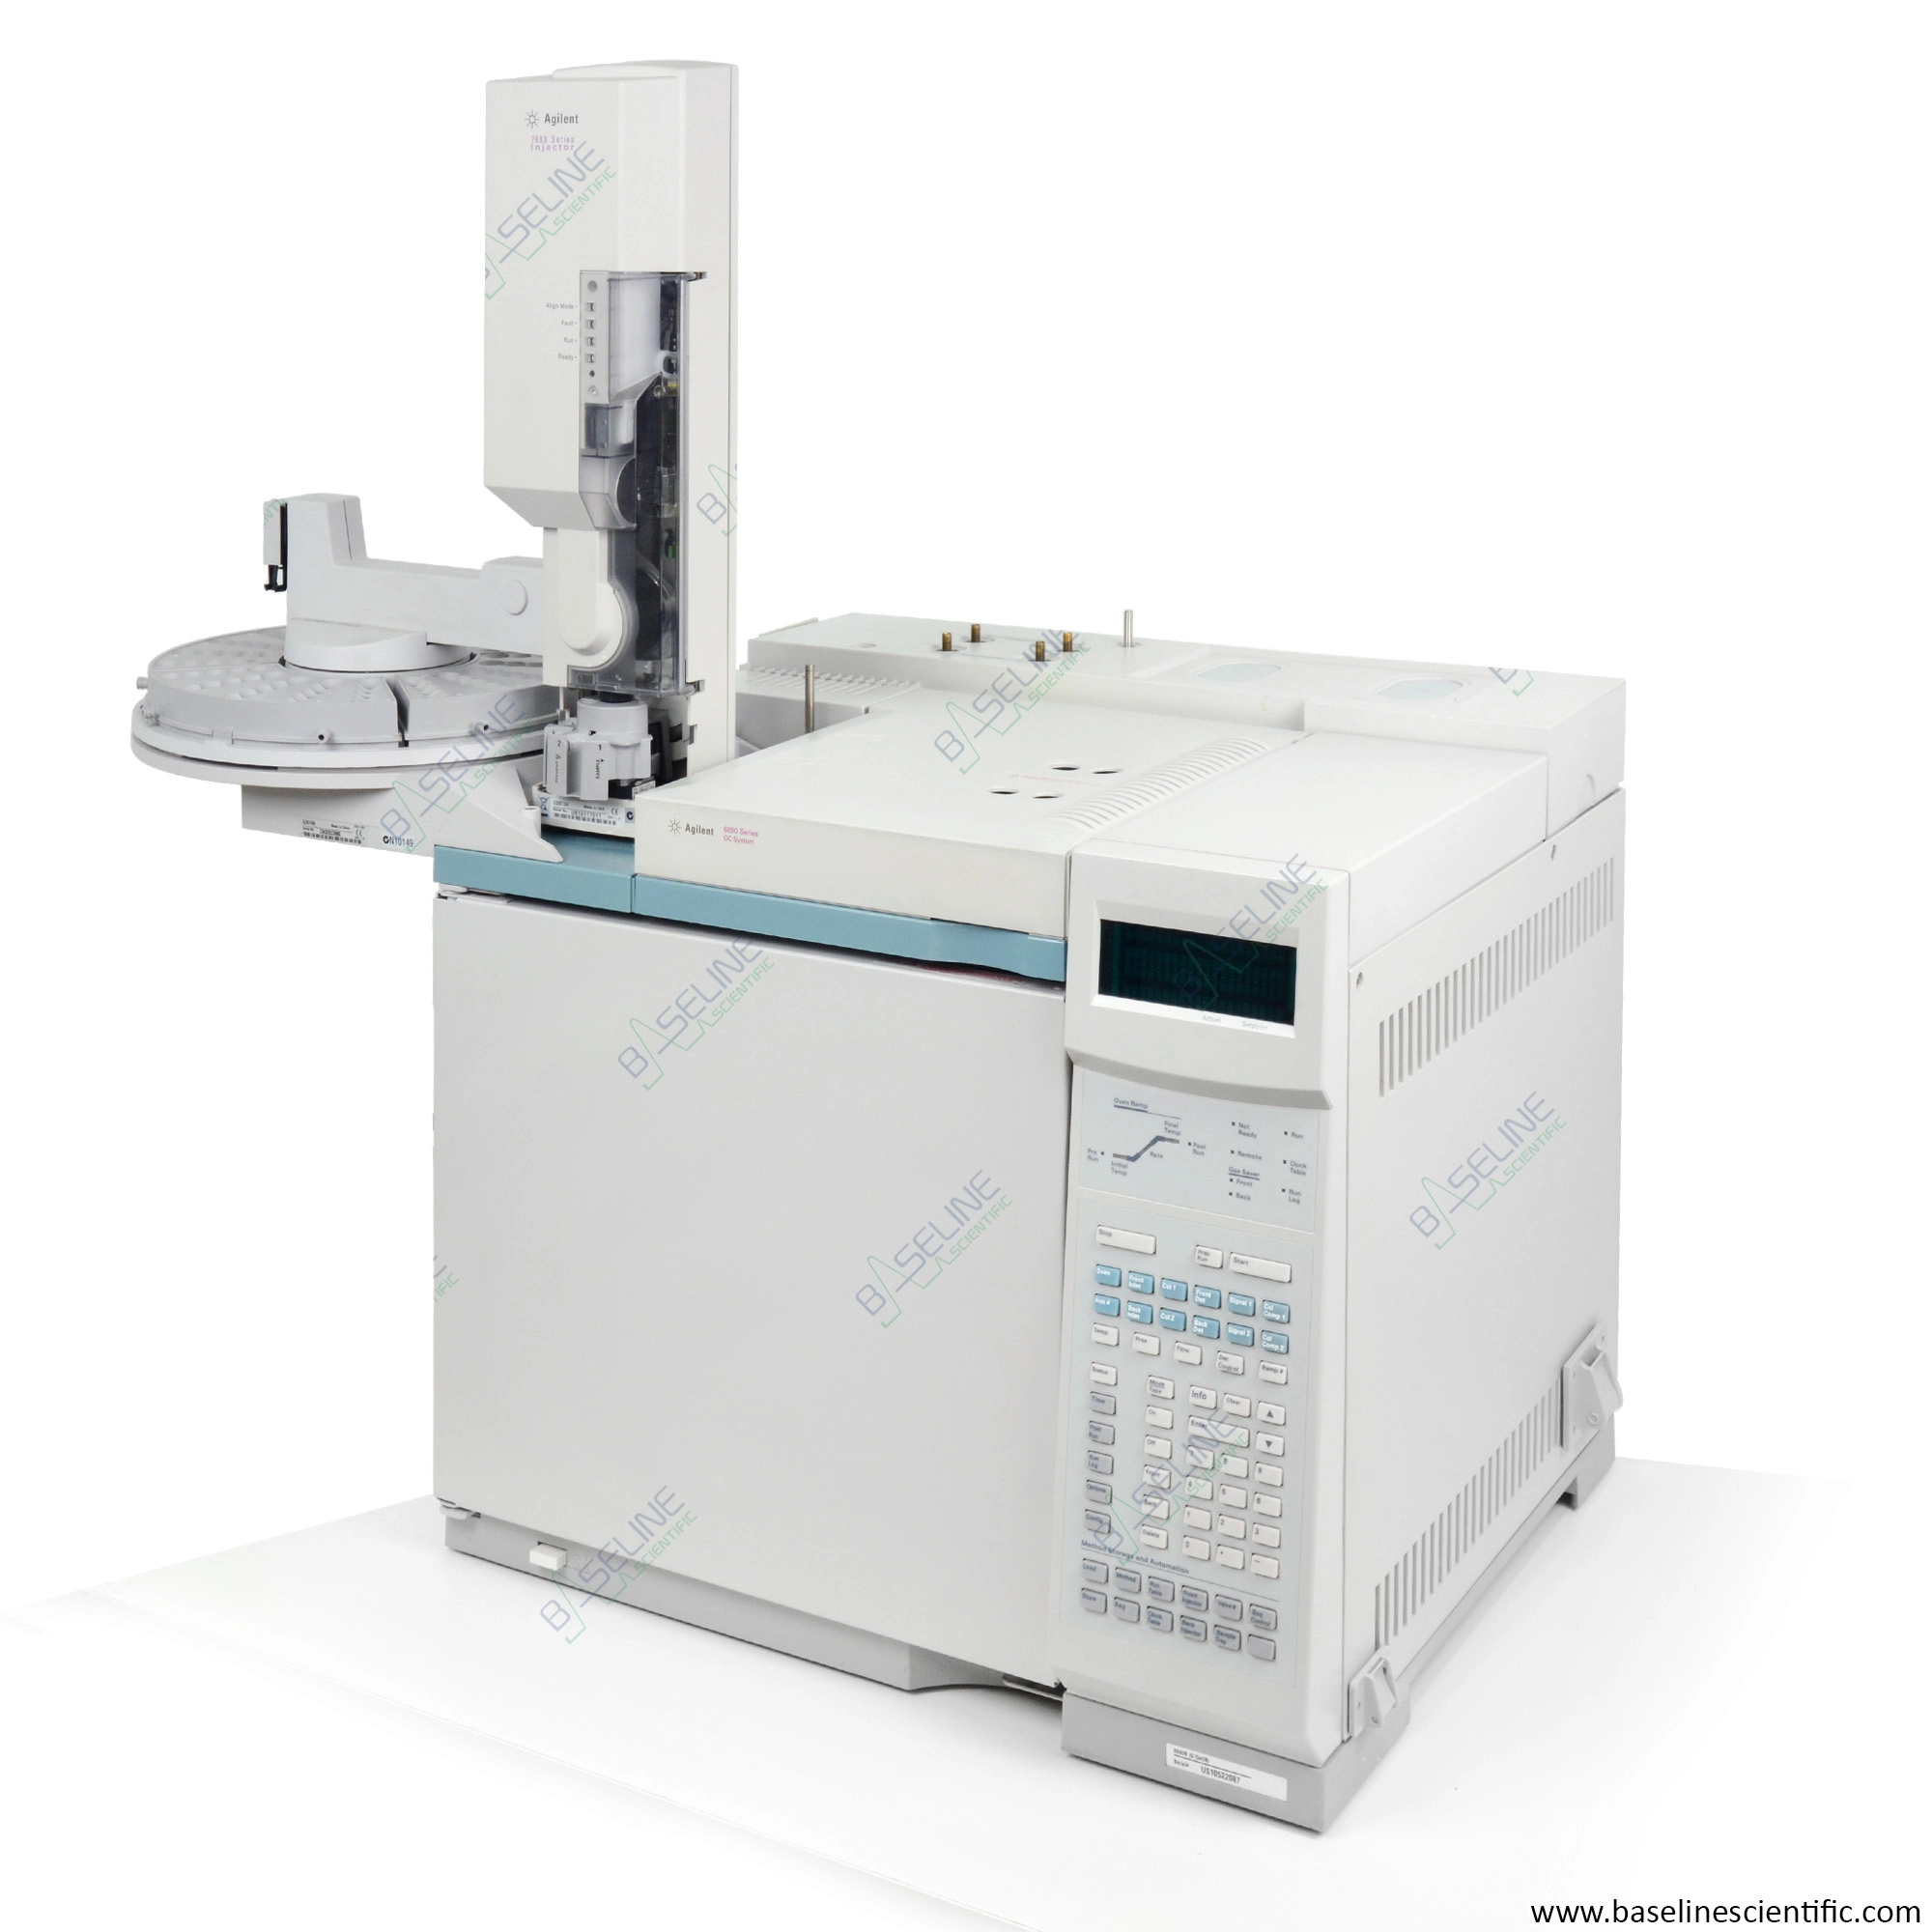 Agilent 6890 GC with Single SSL, FPD and 7683 Series Autosampler